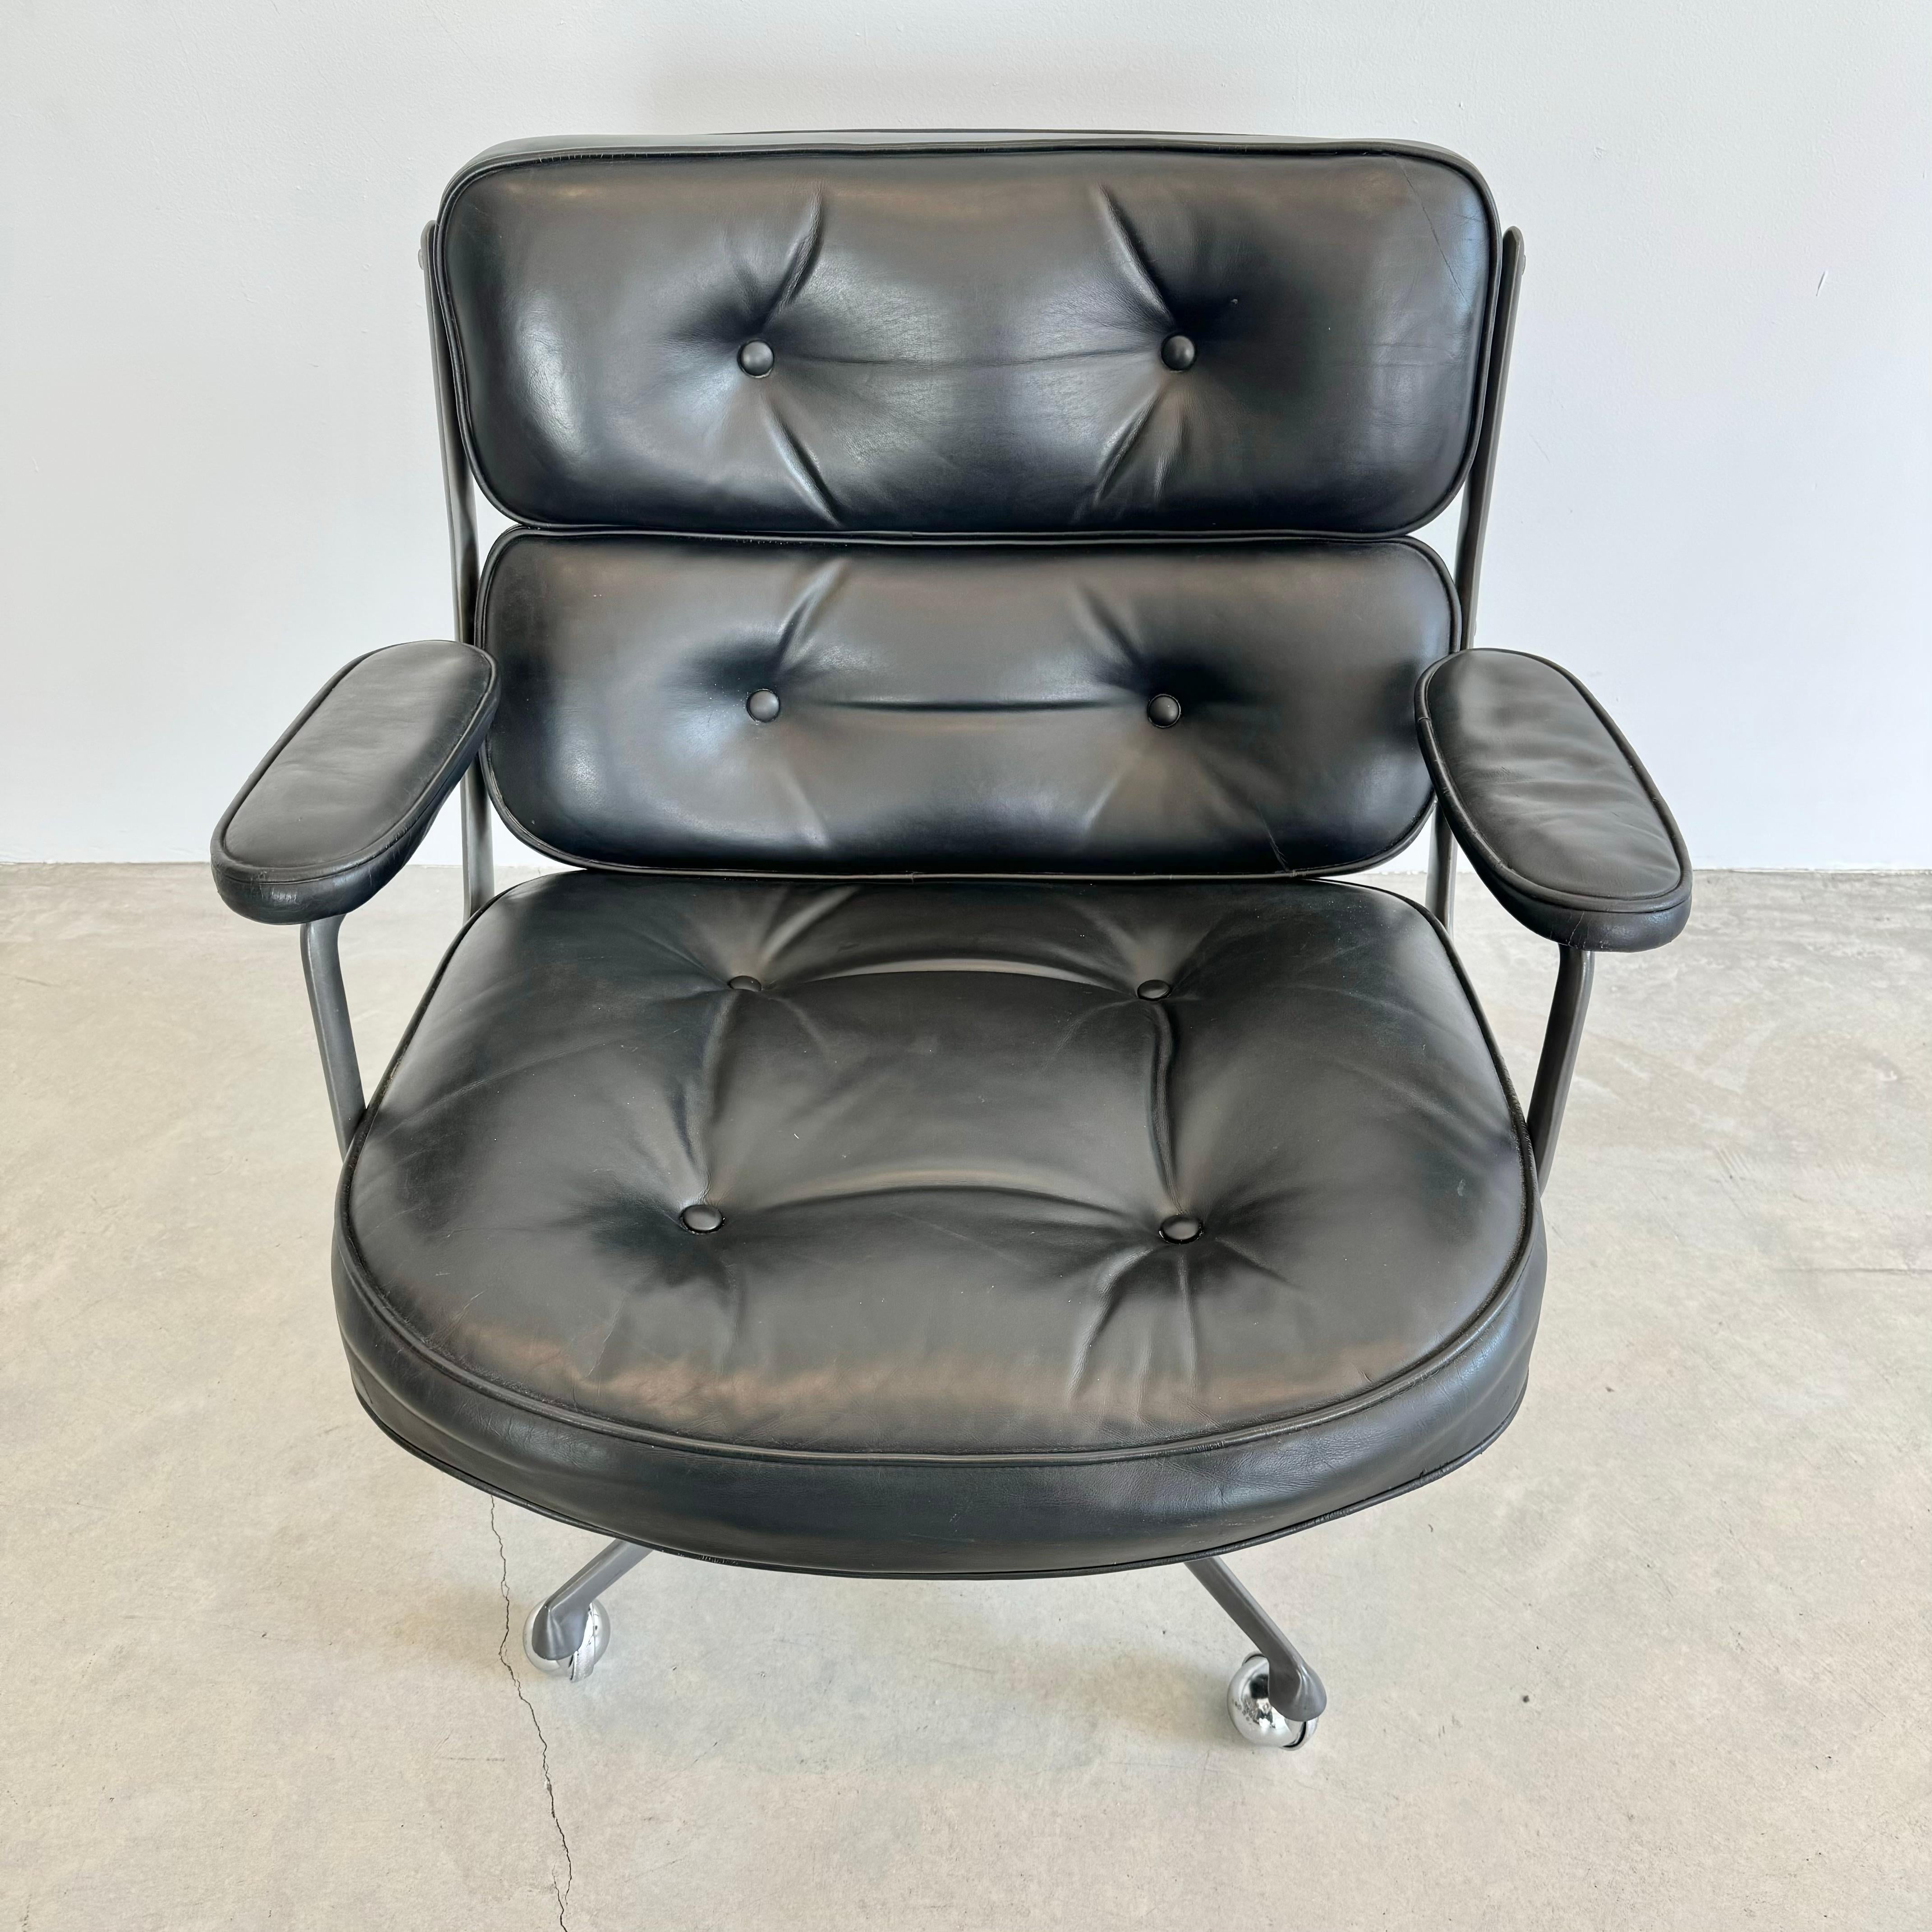 Eames Time Life Lobby Lounge Chair in Black Leather for Herman Miller, 1980s USA For Sale 1